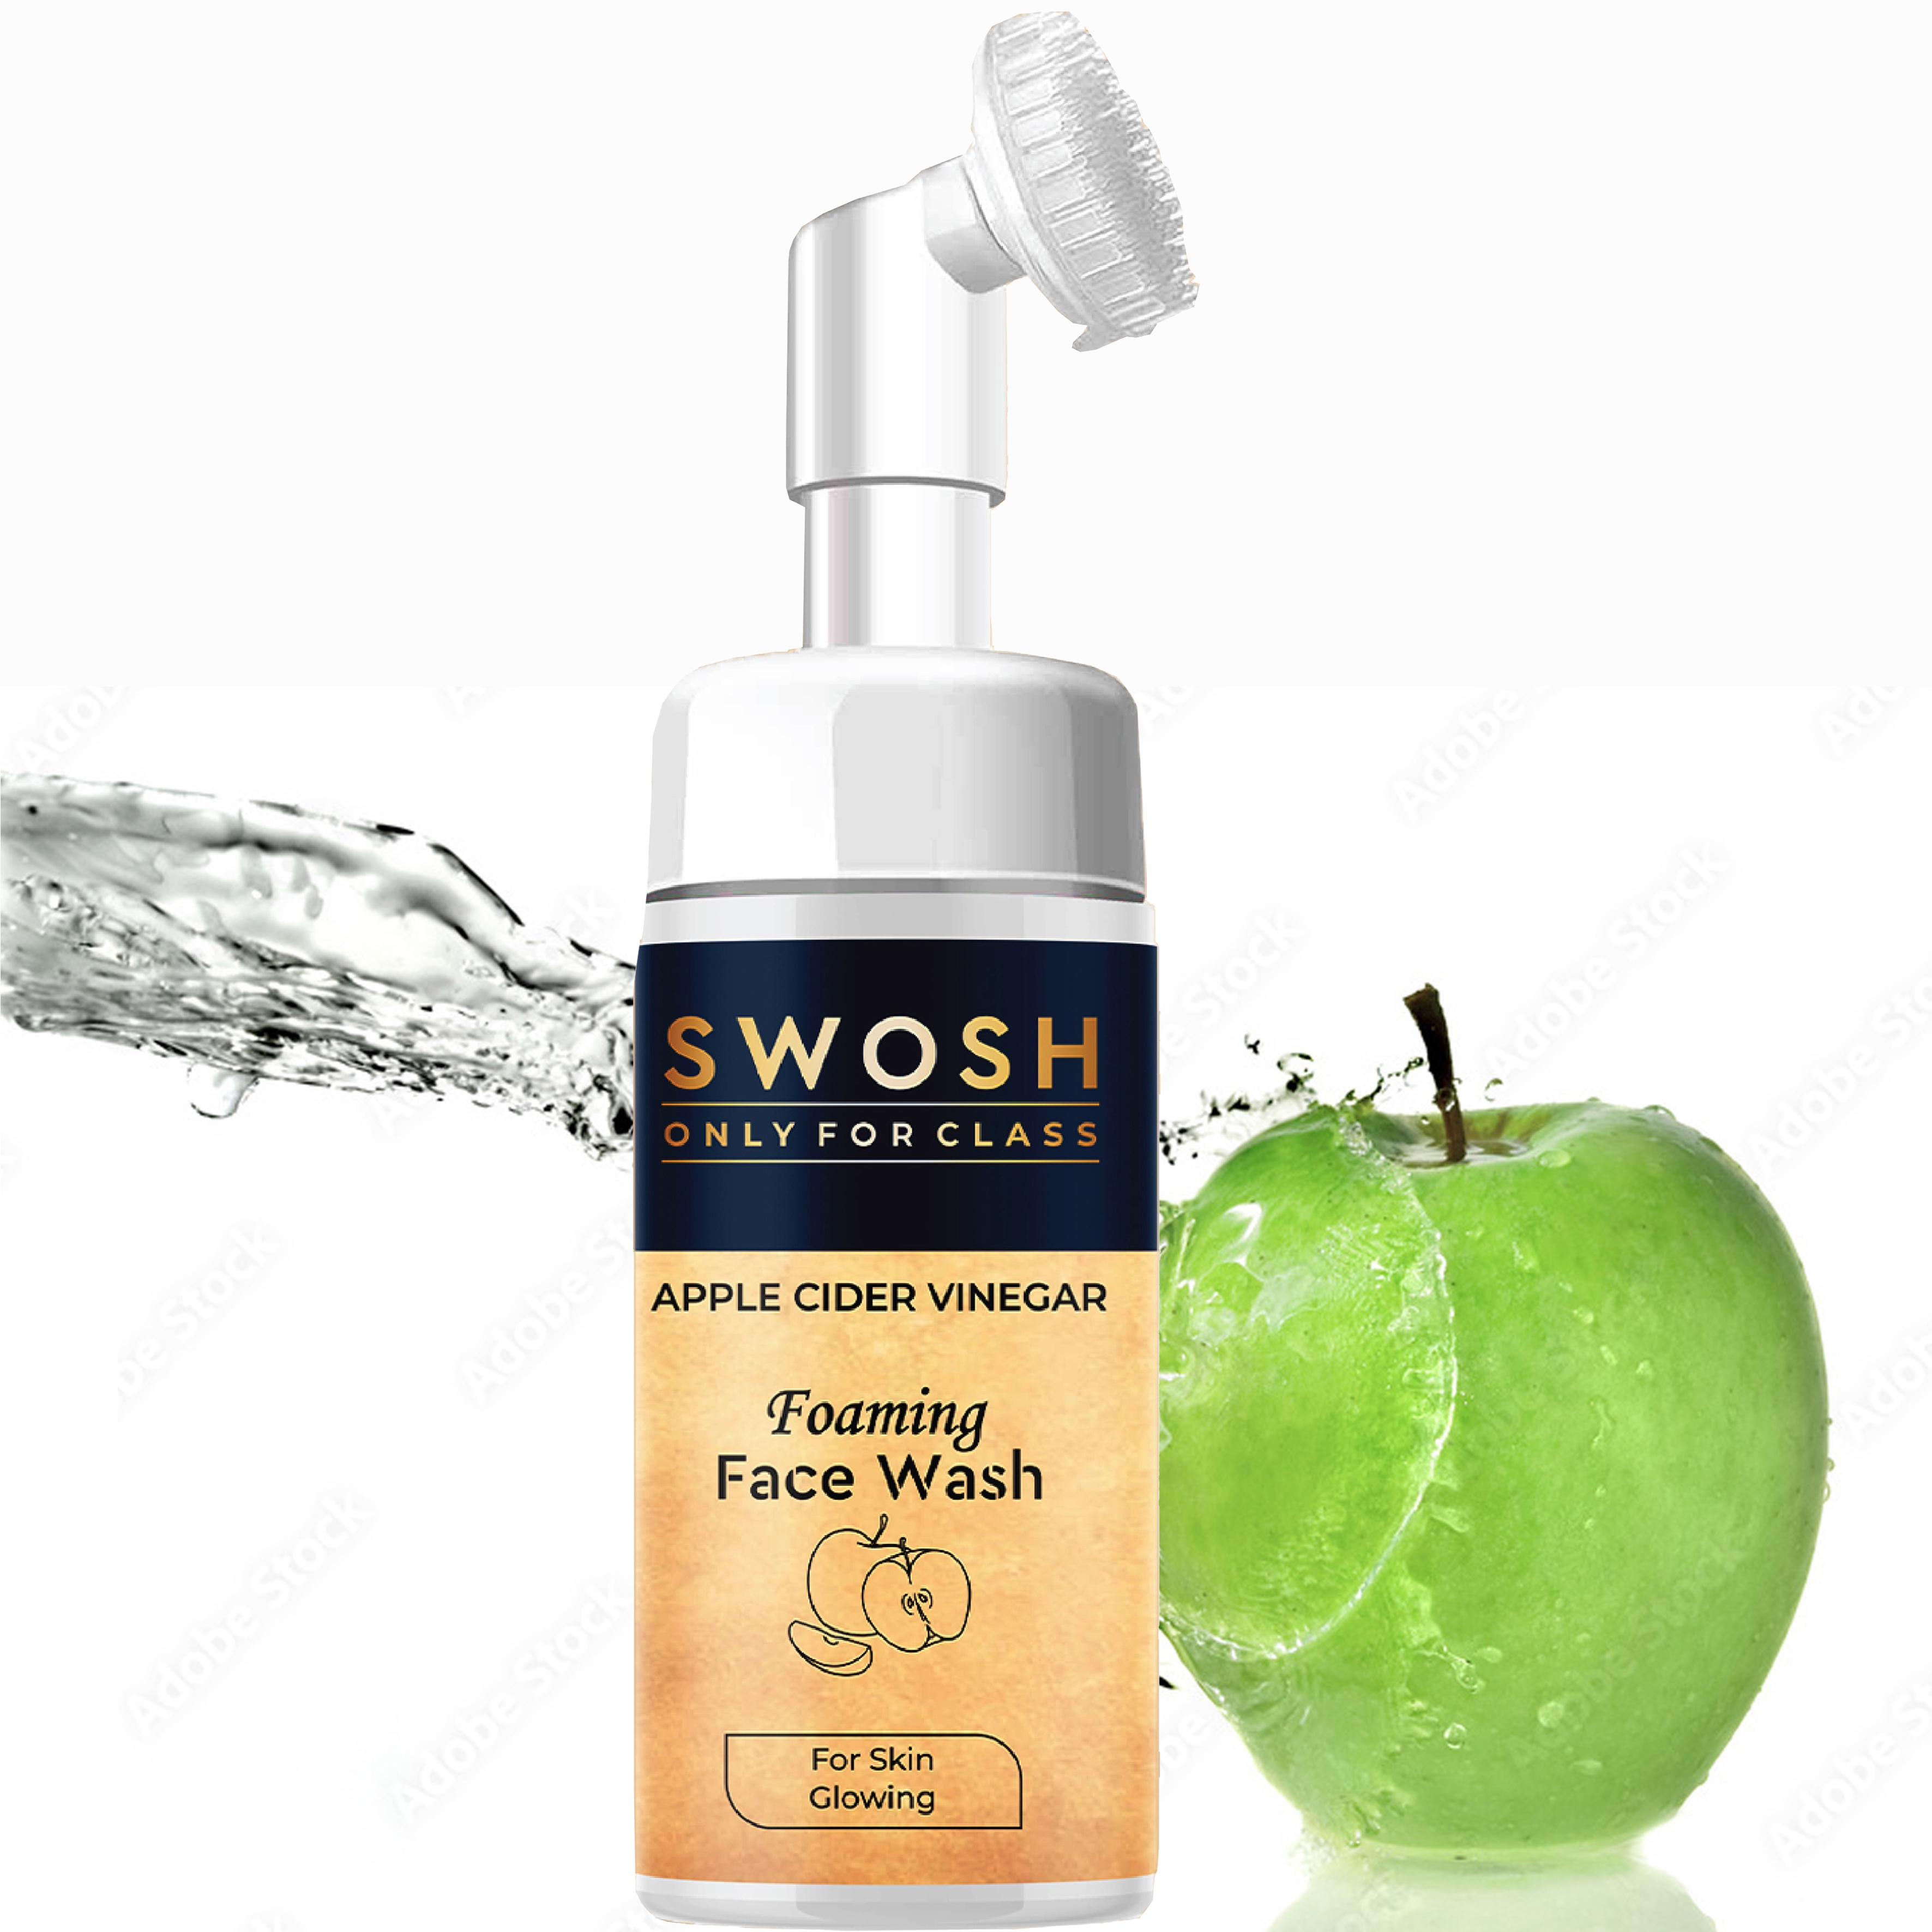 SWOSH | SWOSH Apple Cider vinegar (Apple extract) Foaming Face Wash for Acne Prone & Oily Skin - No Parabens, Sulphate, Silicones & Colour (with Built-in Face Brush), 100 ml 0